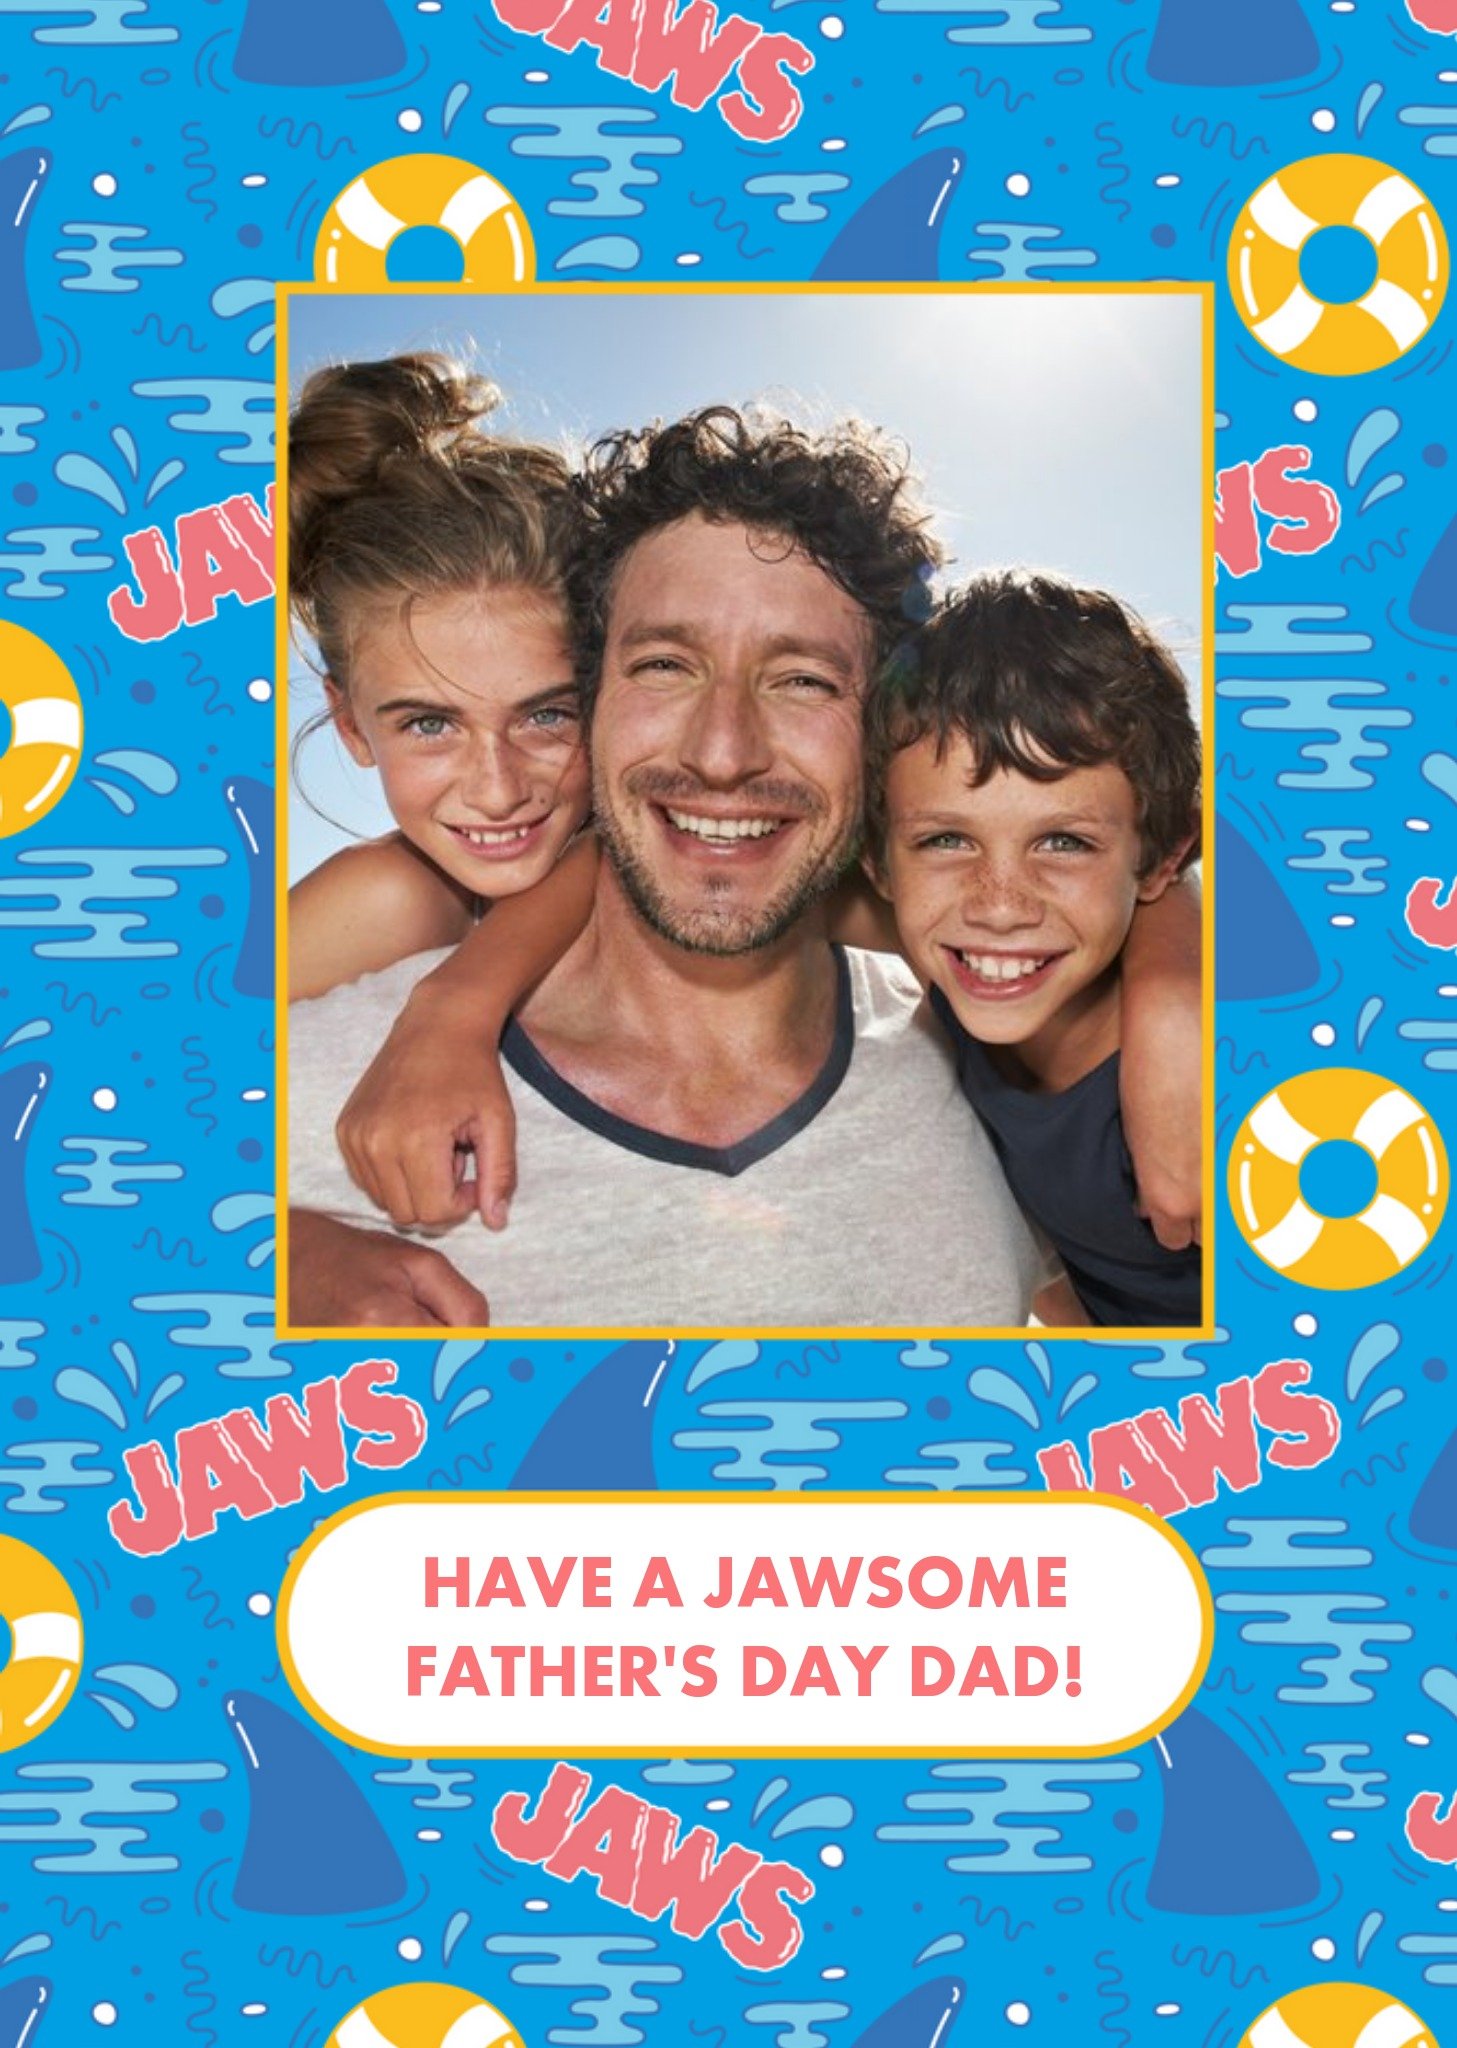 Moonpig Jaws Cartoon Sharks Have A Jaw-Some Father's Day Photo Card, Large